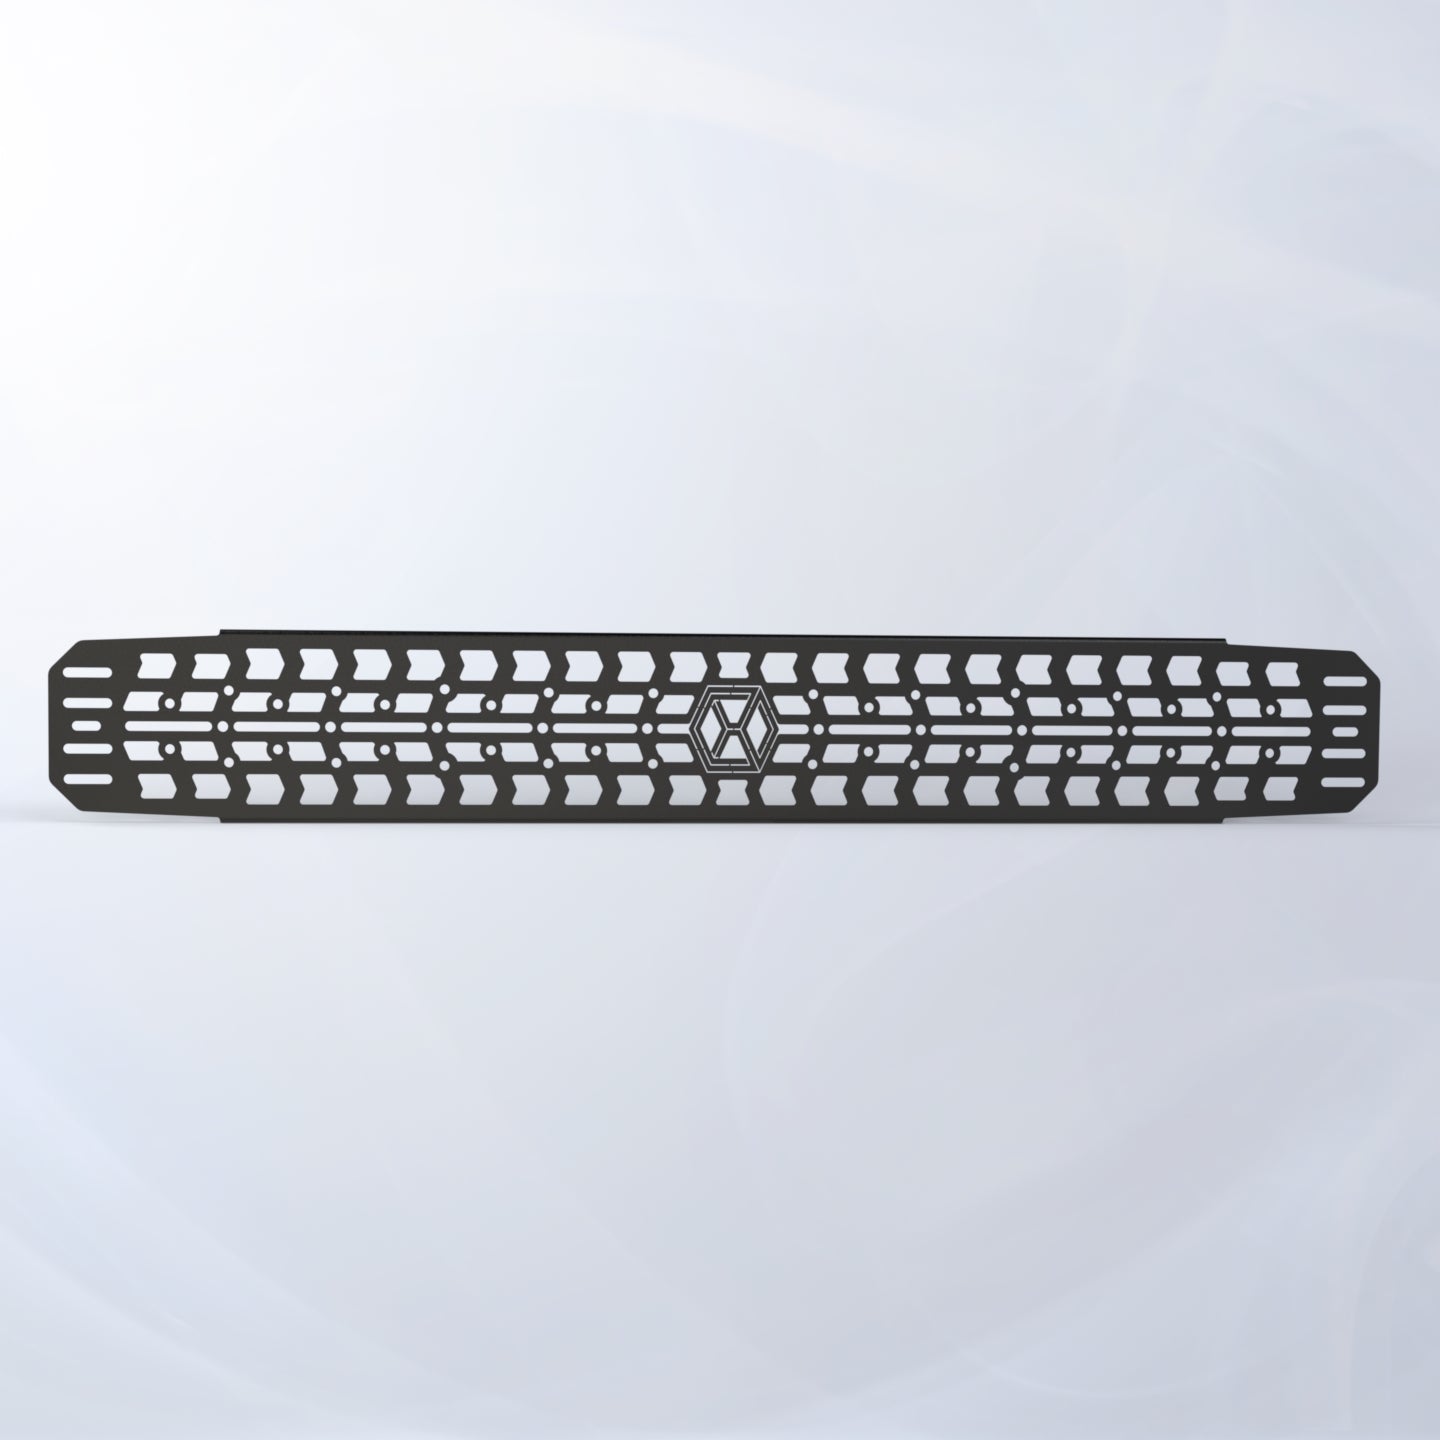 XBRS Tread Molle Plate - Stainless Steel Black 6" x 48"